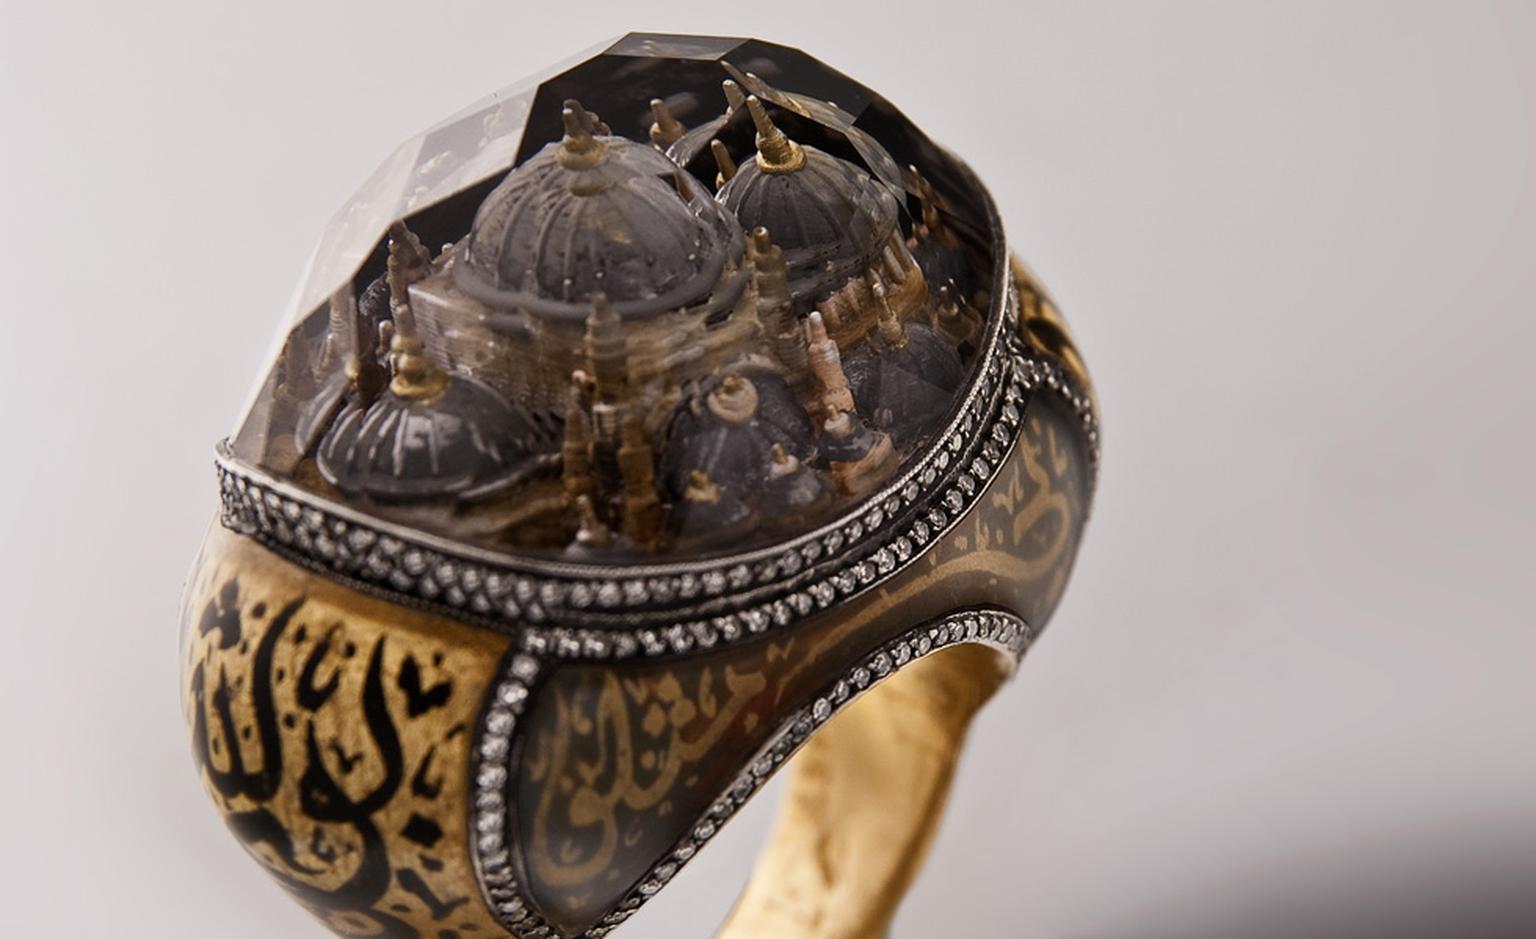 Sevan Biçakçi ring showing a range of techniques including intaglio carving and calligraphy.